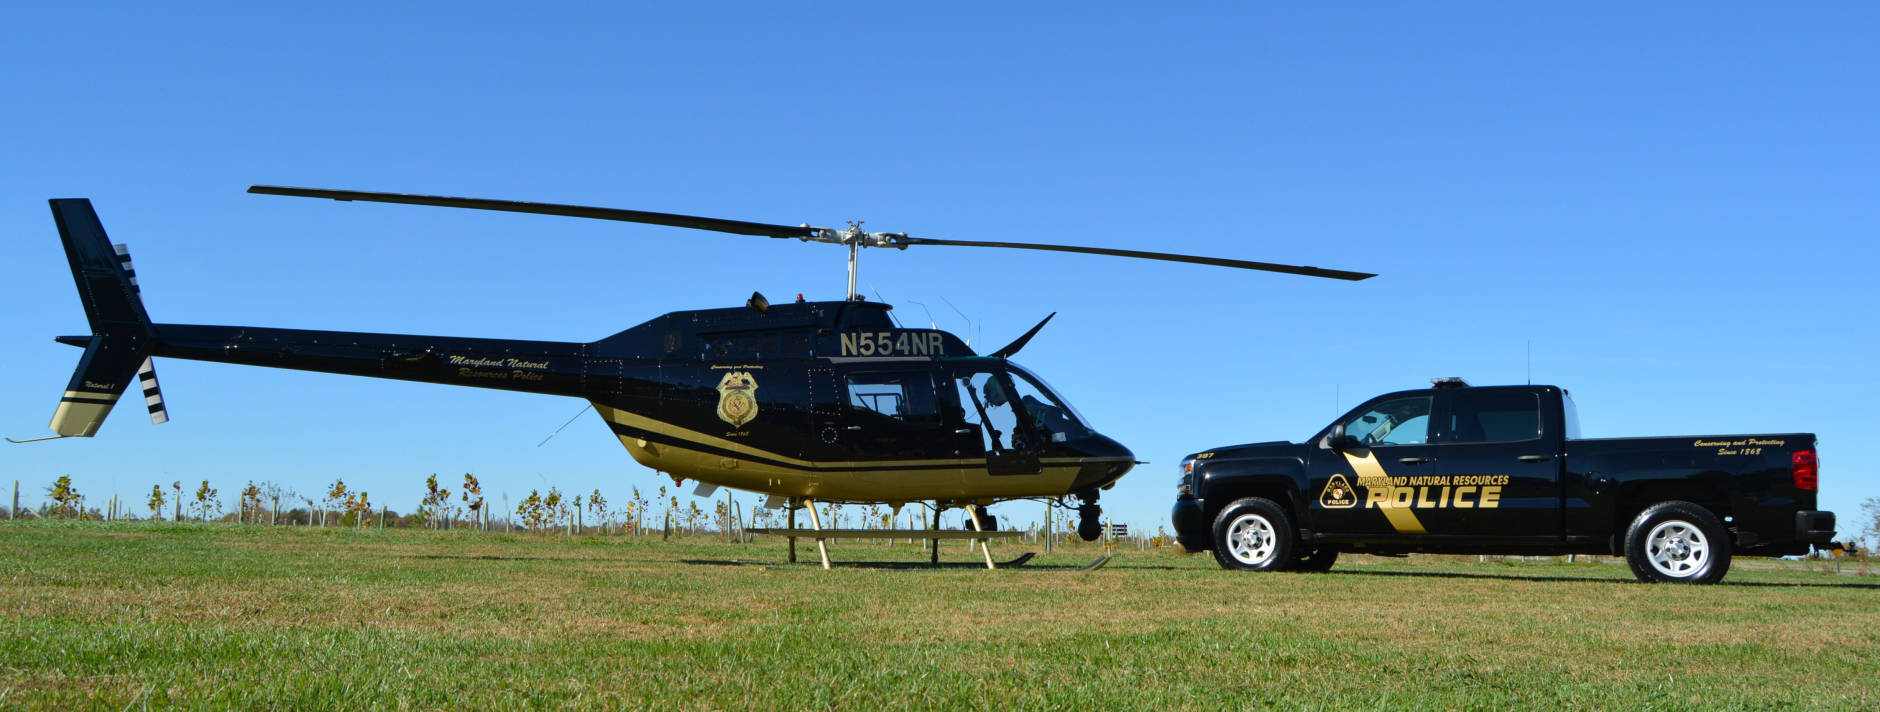 "We have infrared on our helicopter so we can look for images at night [of] people illegally hunting," said DNR Police spokeswoman Candy Thomson. “And we can use it to look for people who are lost." (Courtesy Maryland DNR police)